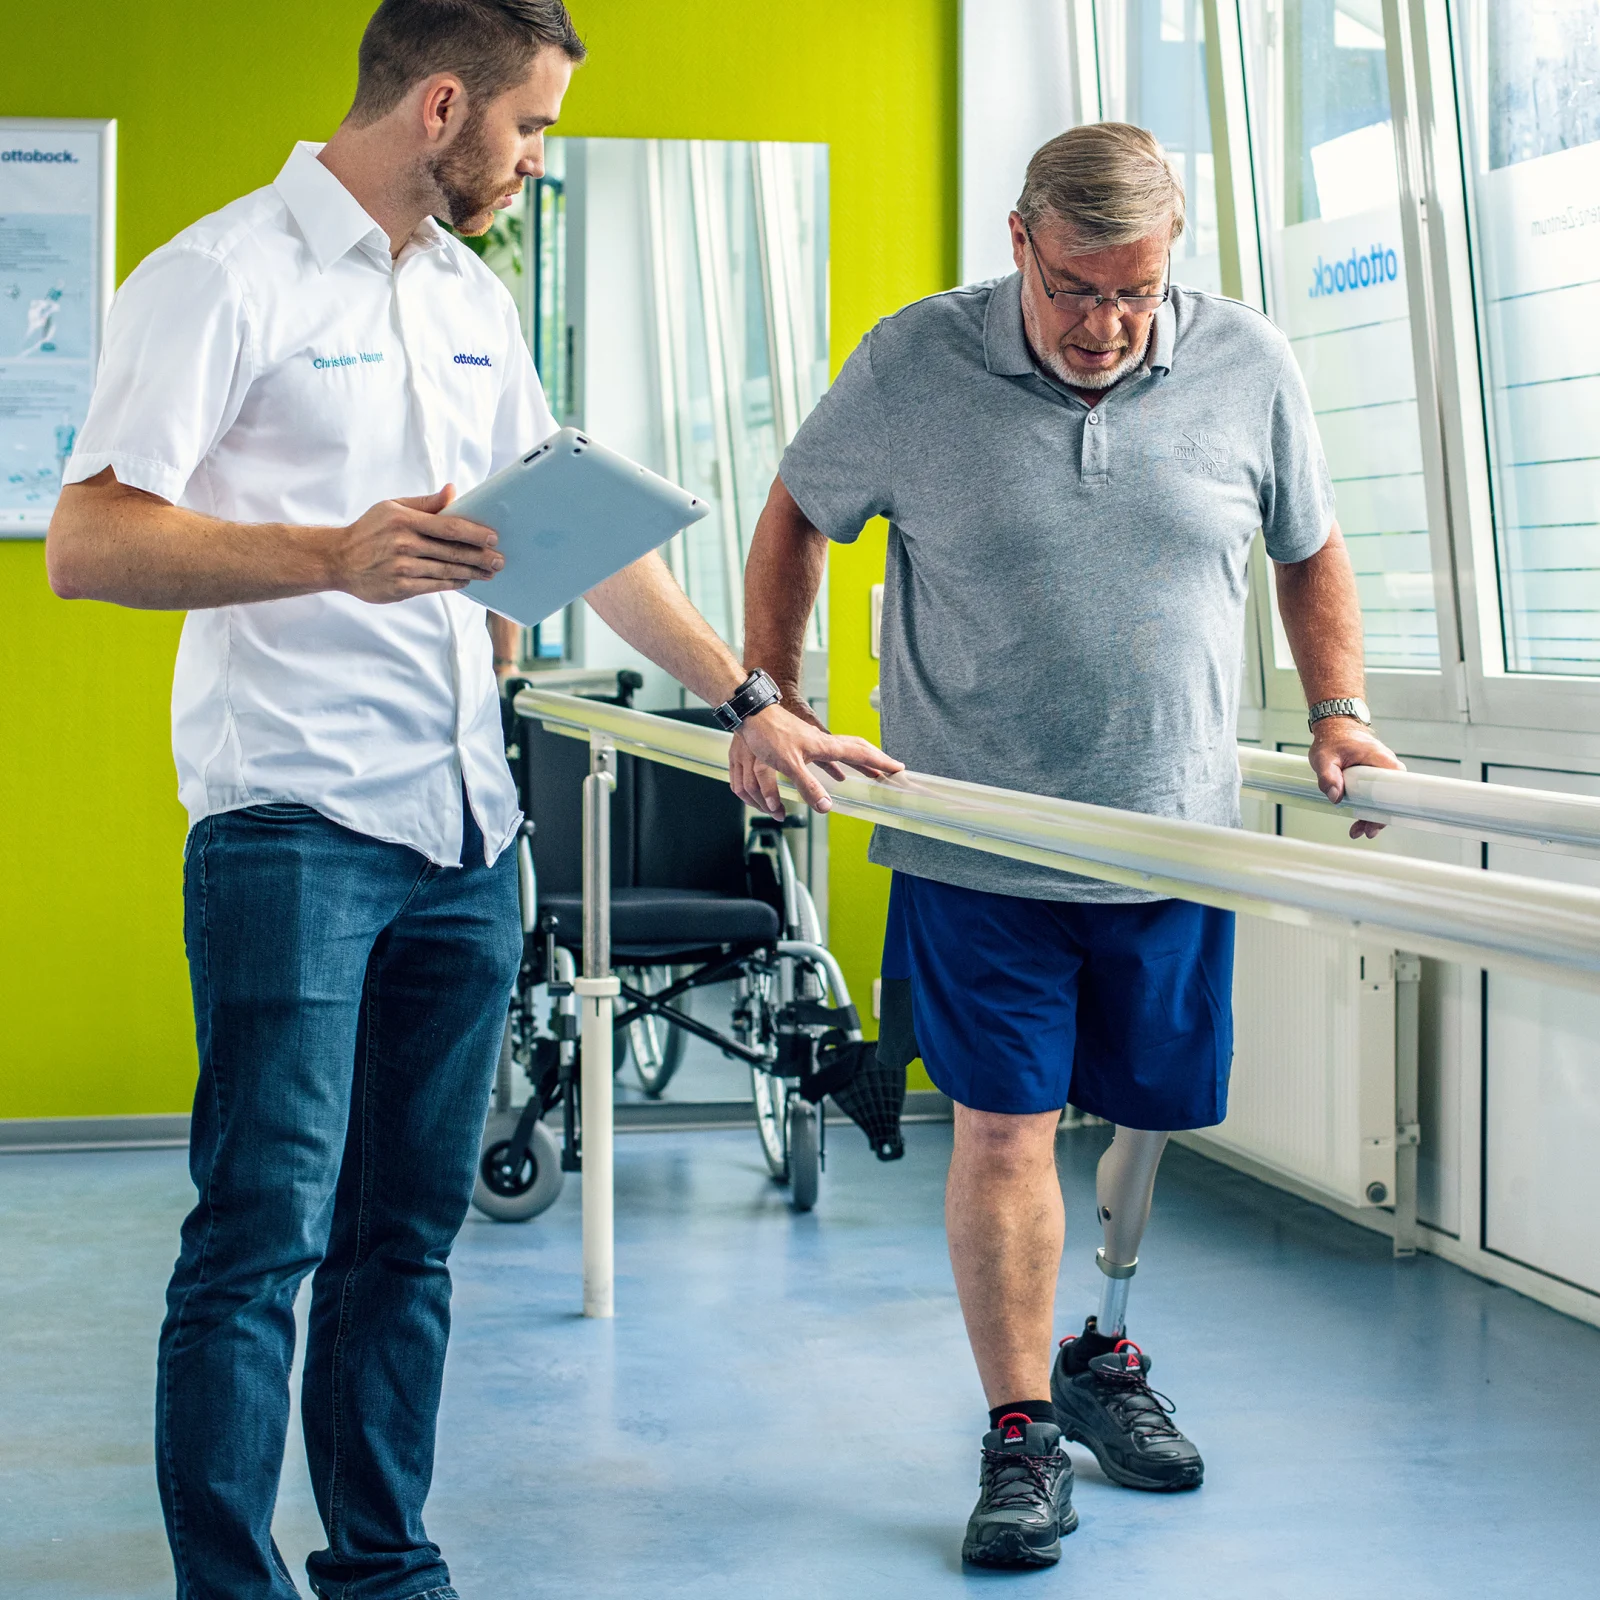 Leg amputee with Ottobock Kenevo microprocessor knee at gait training getting instructions from a prosthetist holding a tablet